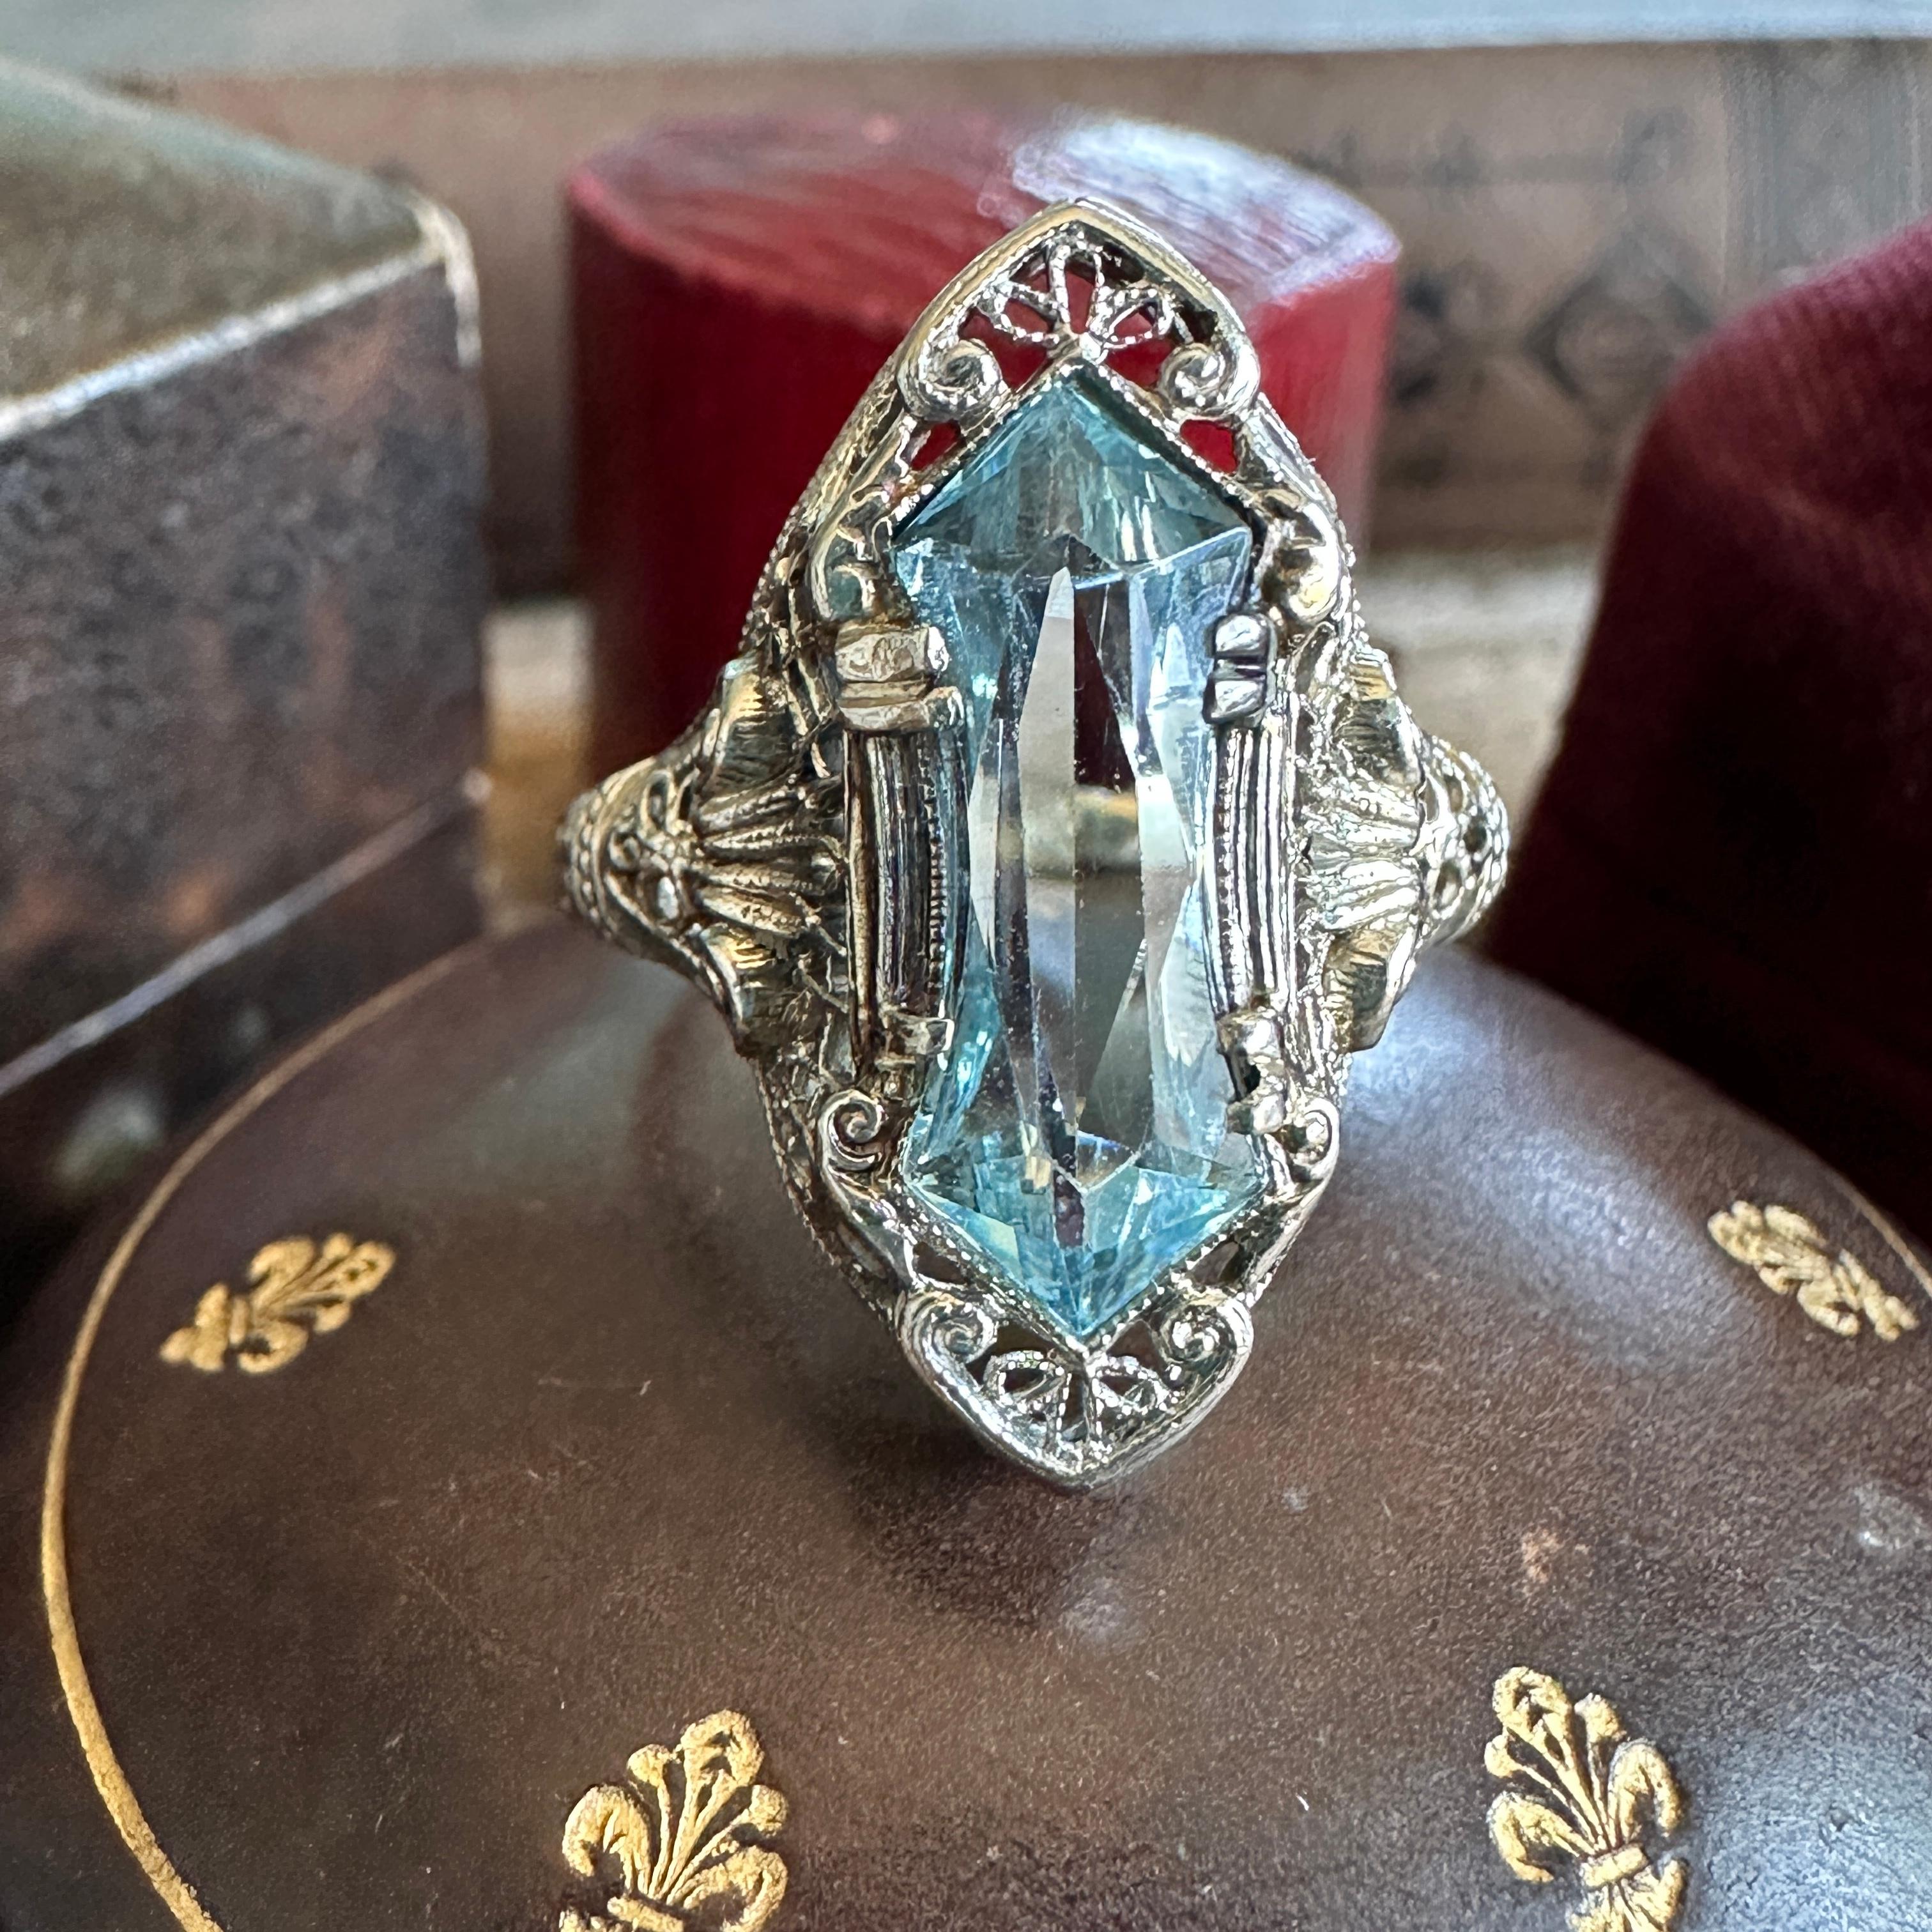 Details: 
Fabulous Edwardian Aquamarine & Diamond 14K white gold filigree ring. The filigree is magnificent, with very detailed work, including engraving on the sides of the band. The craftsmanship is superb, and the setting is in near perfect